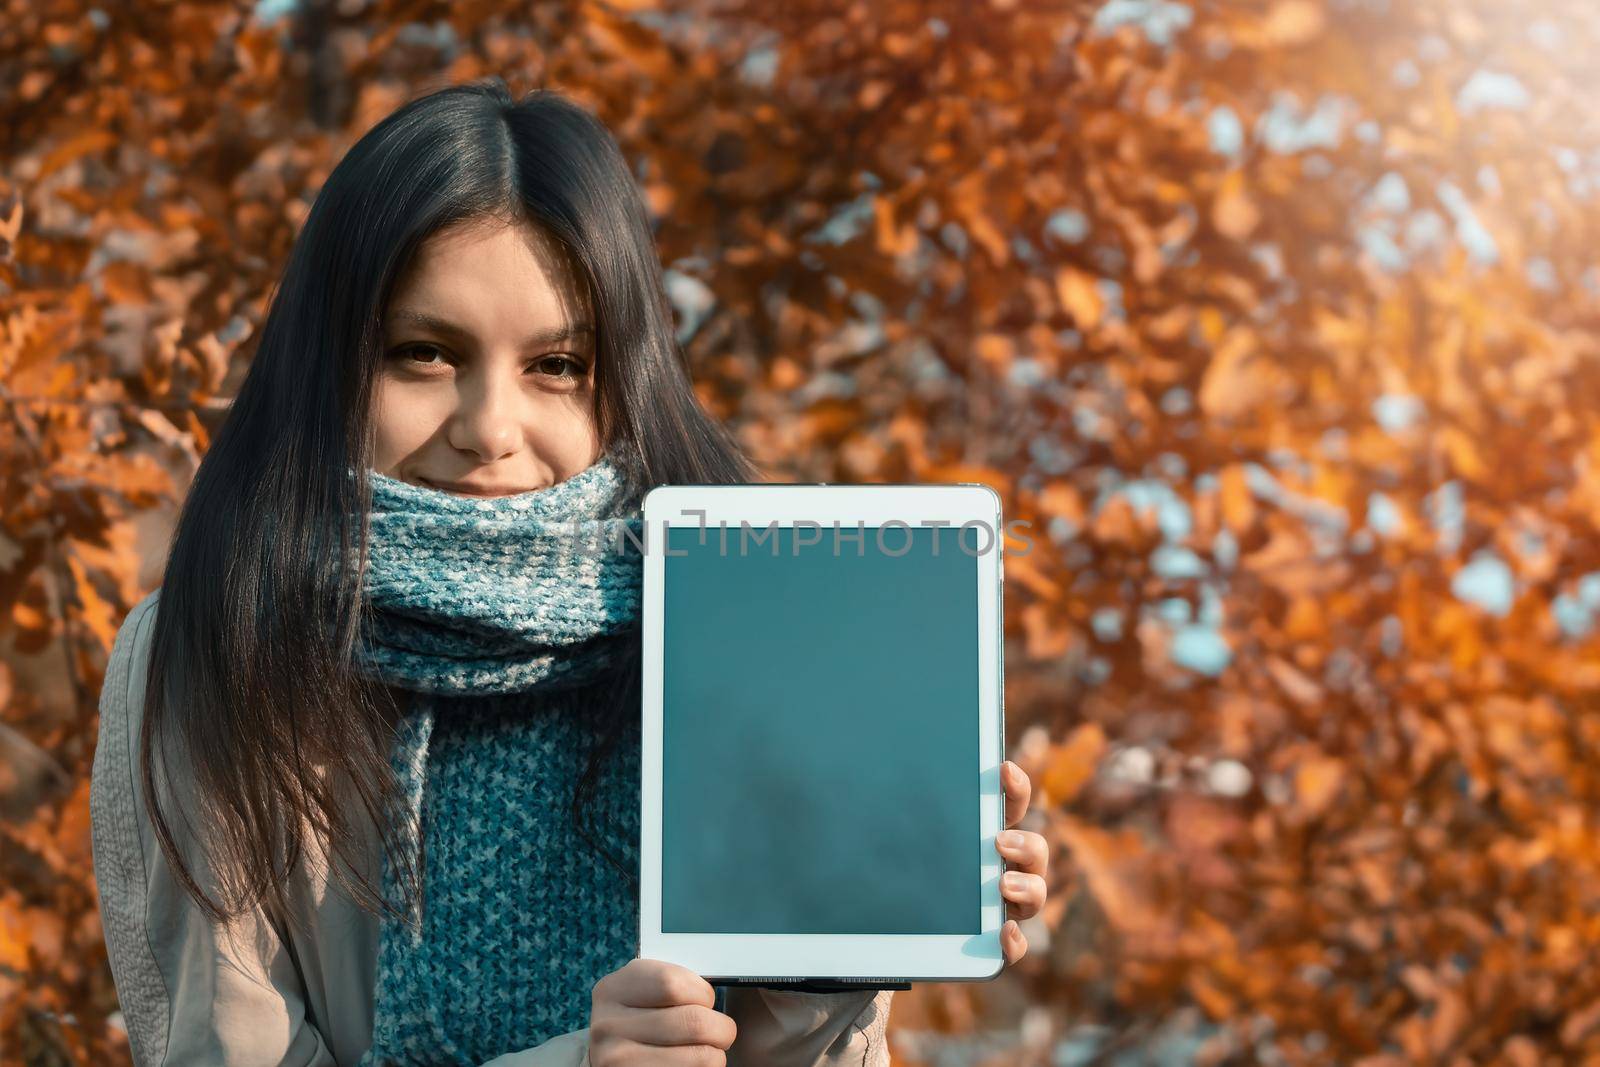 Girl shows the screen of the tablet to the viewer while standing against the backdrop of bright autumn foliage in the park.